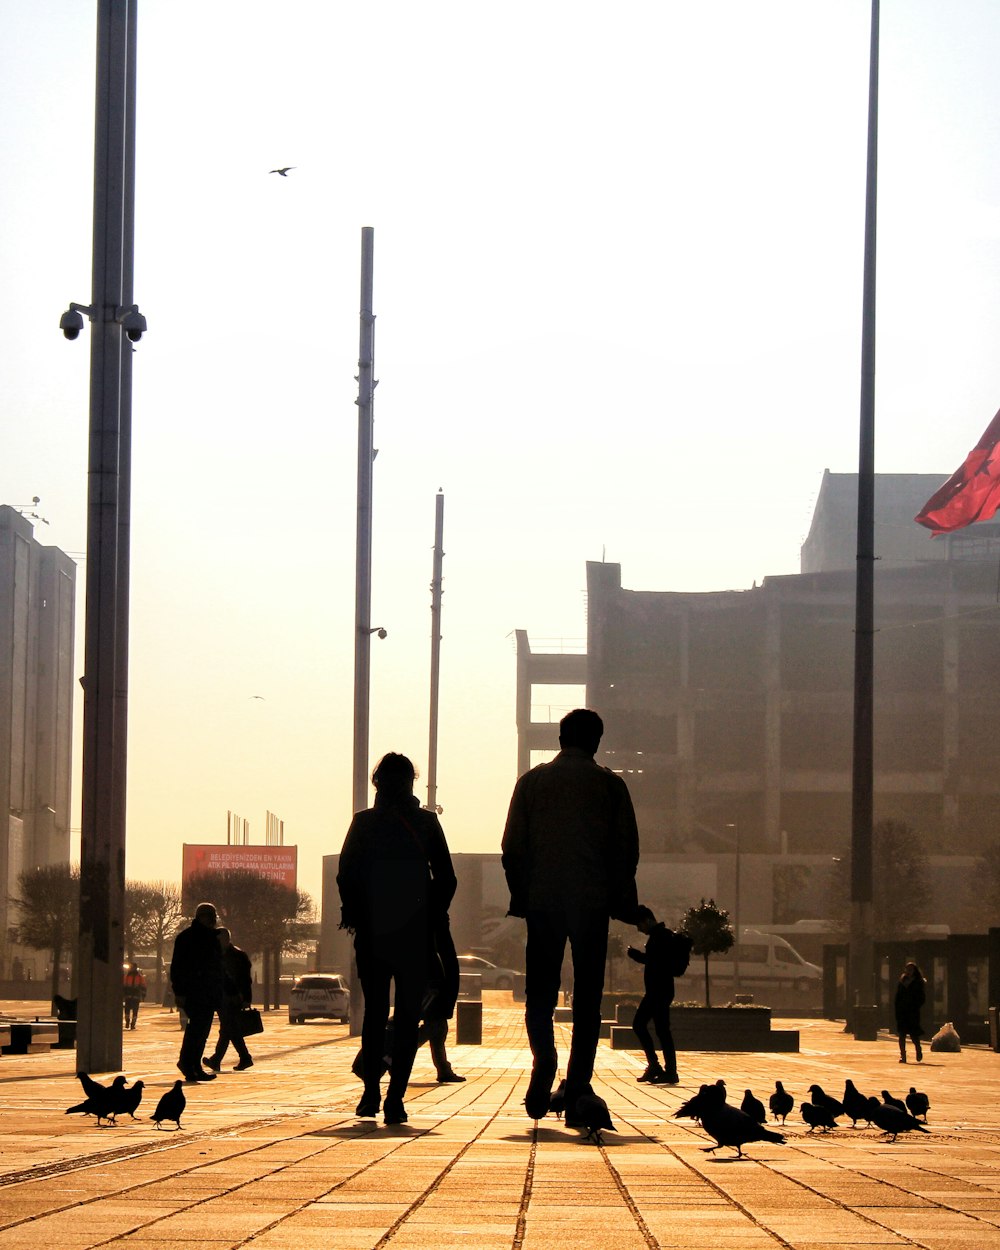 silhouette of people and pigeons across buildings during daytime